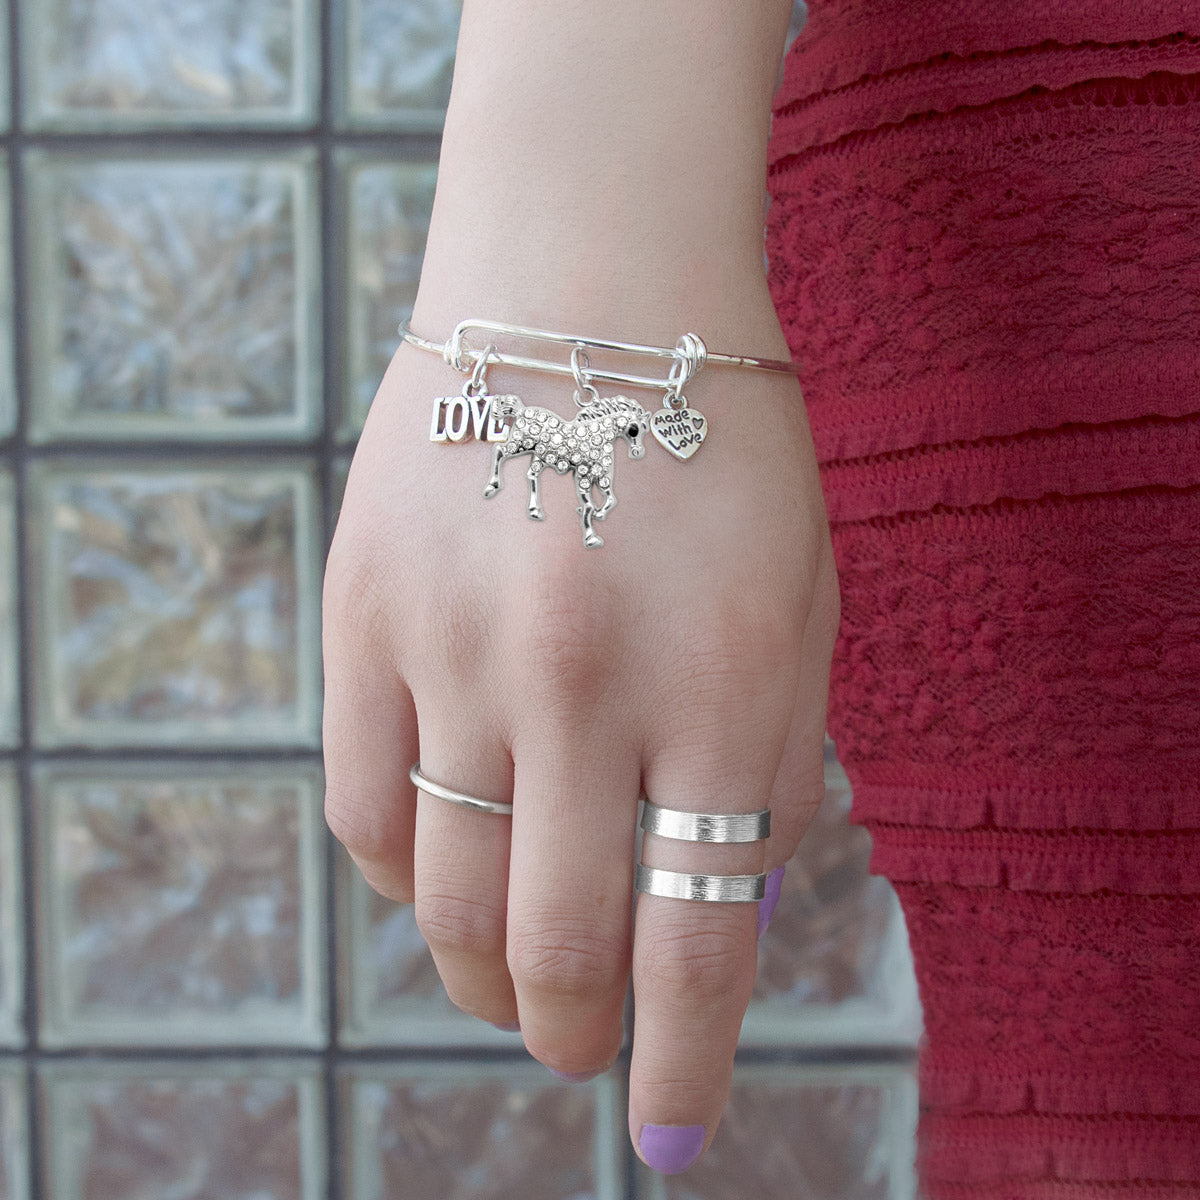 Silver Love Galloping Horse Charm Wire Bangle Bracelet